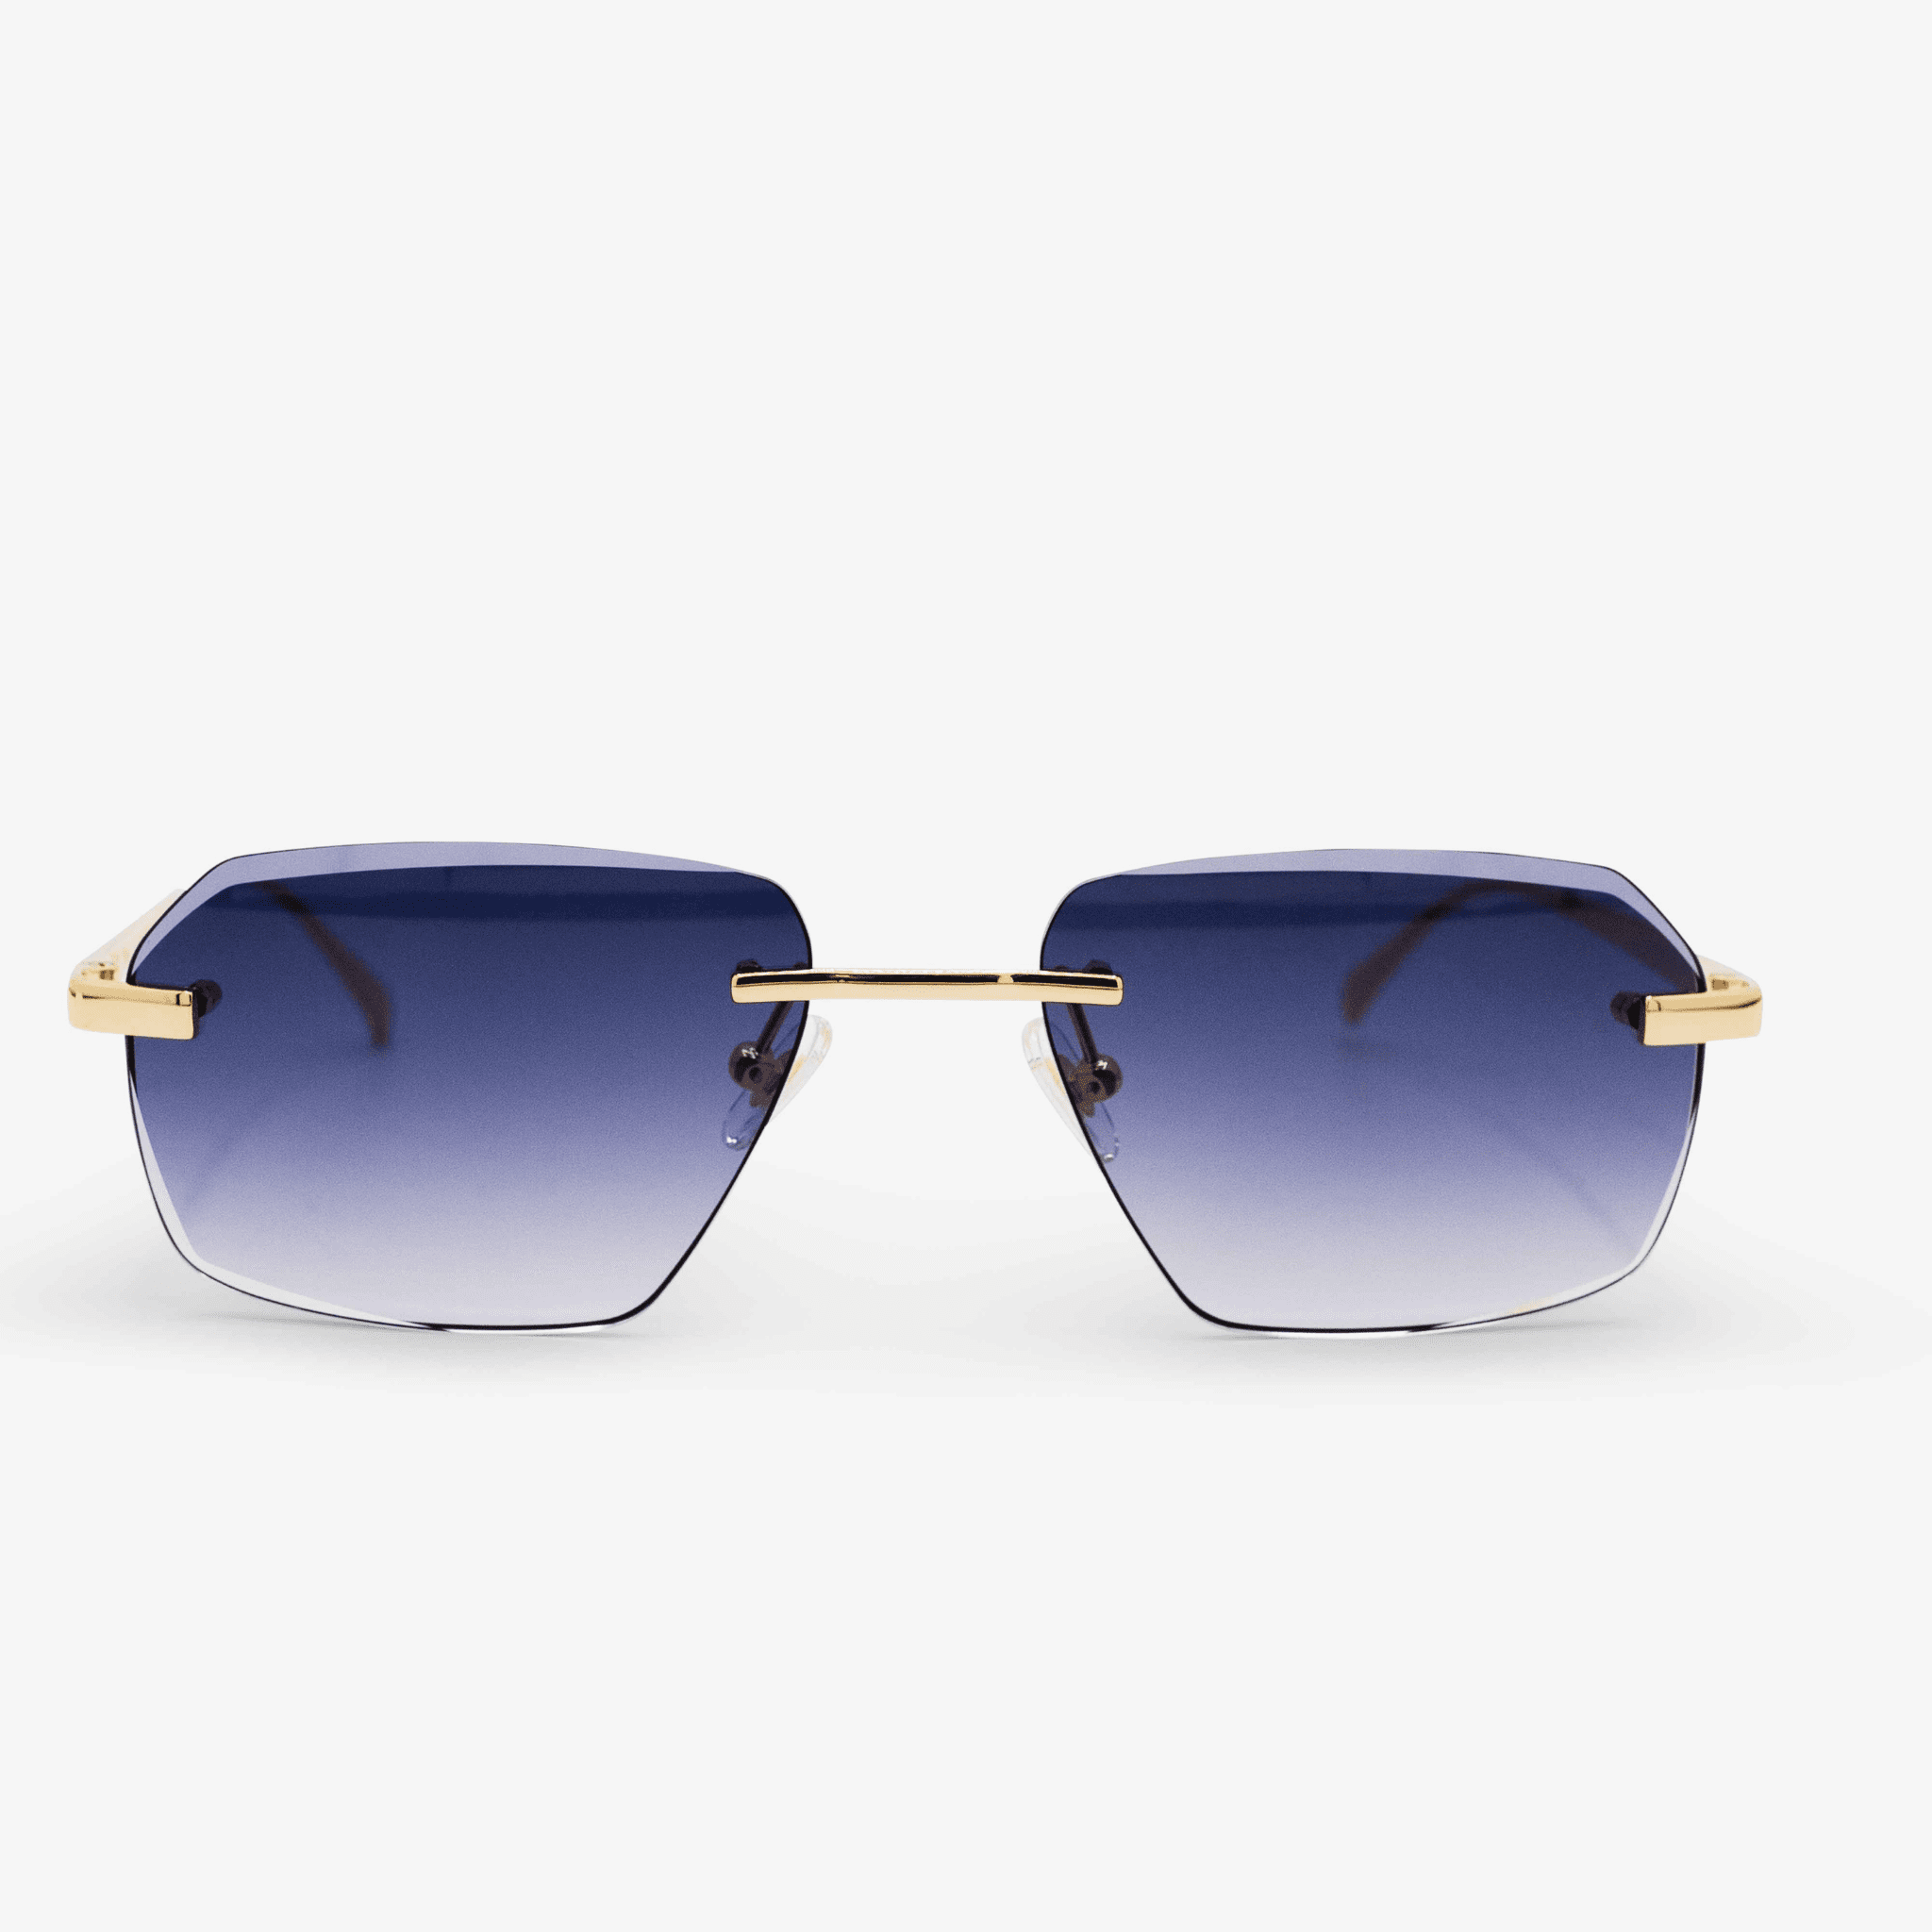 Model Sancy sunglasses showcasing a modern grey diamond-cut, rimless design with 18K gold accents on the arms and bridge, featuring a striking blue tint, against a white background.